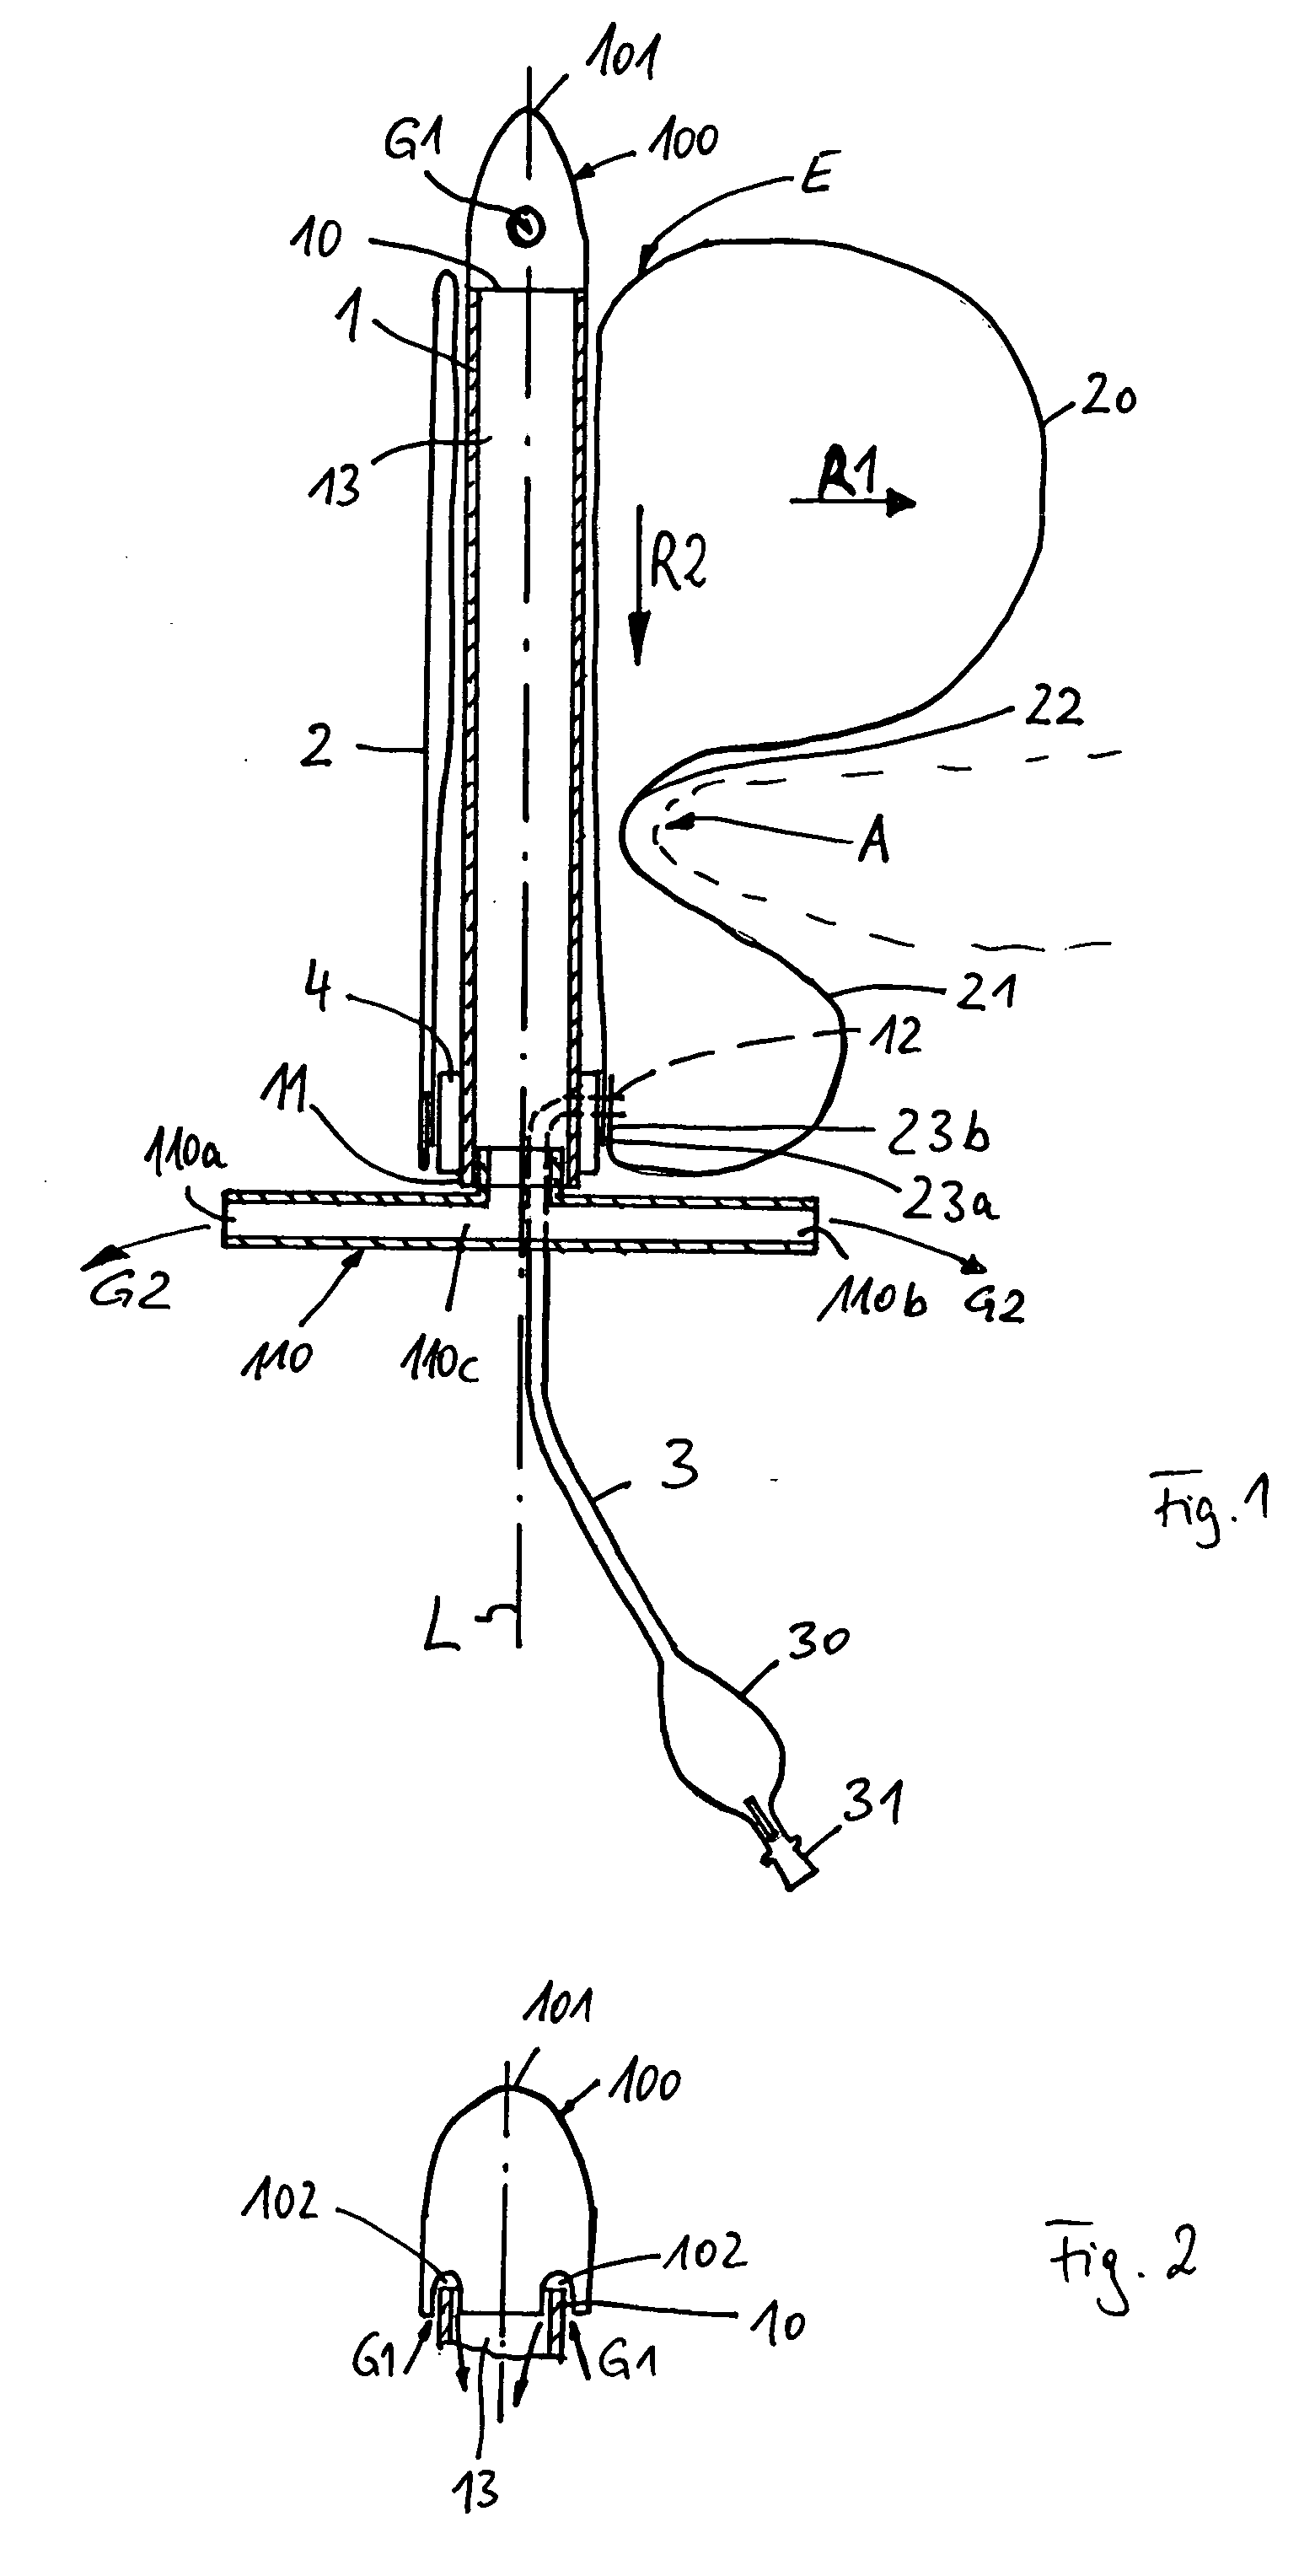 Occlusion System for Management of Rectal or Anal Incontinence